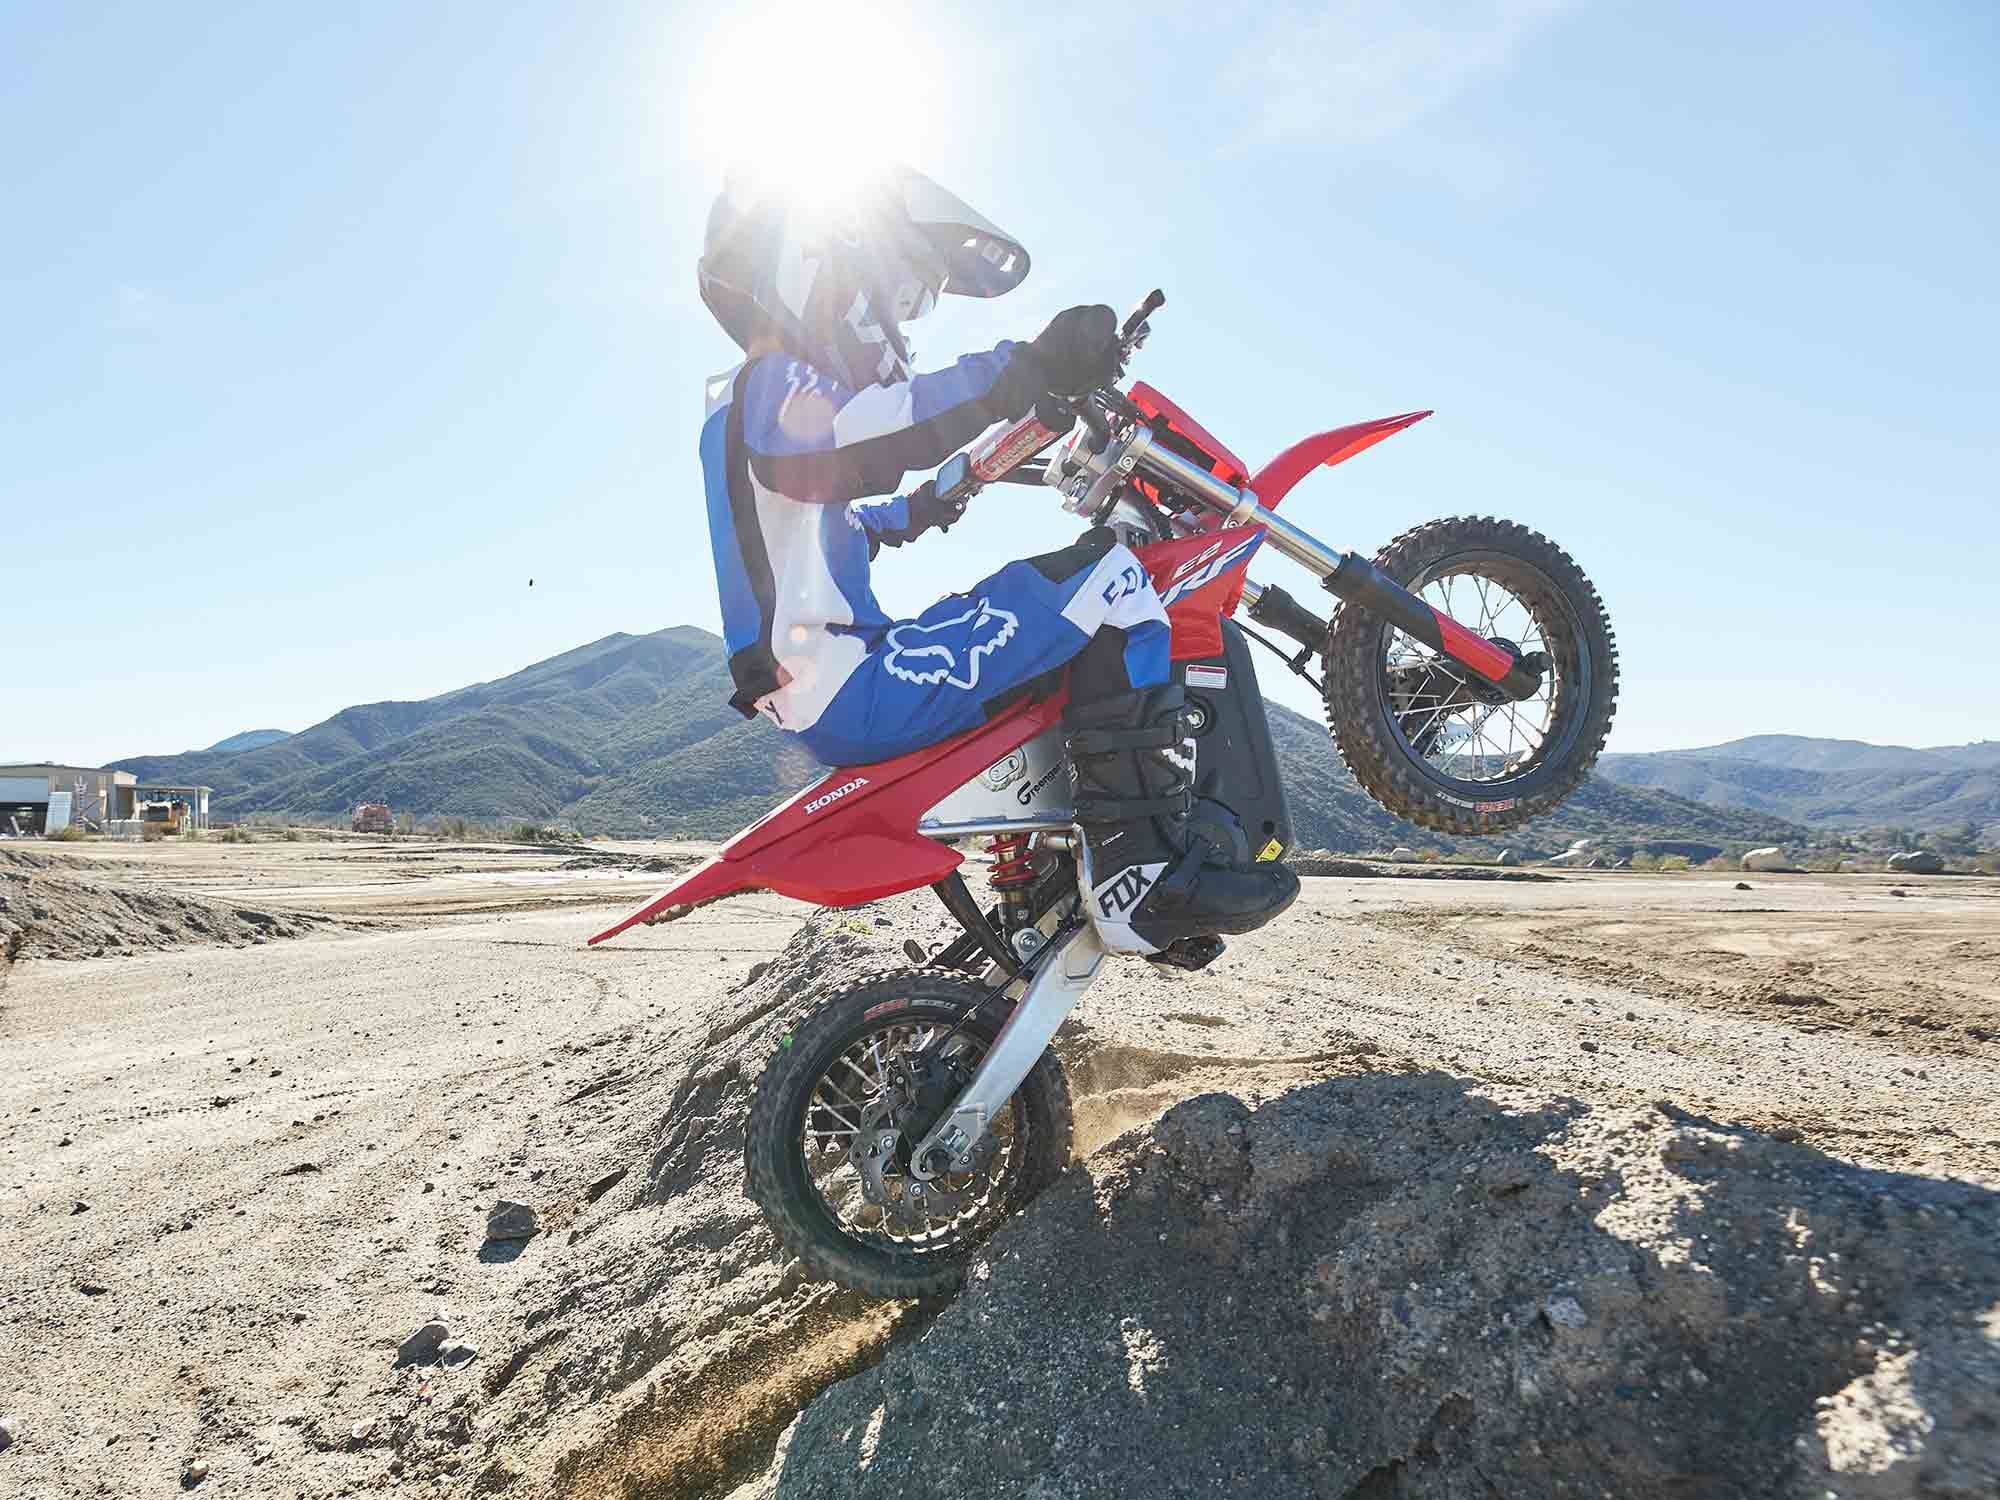 The CRF-E2 is capable of producing 18.4 pound-feet of torque.